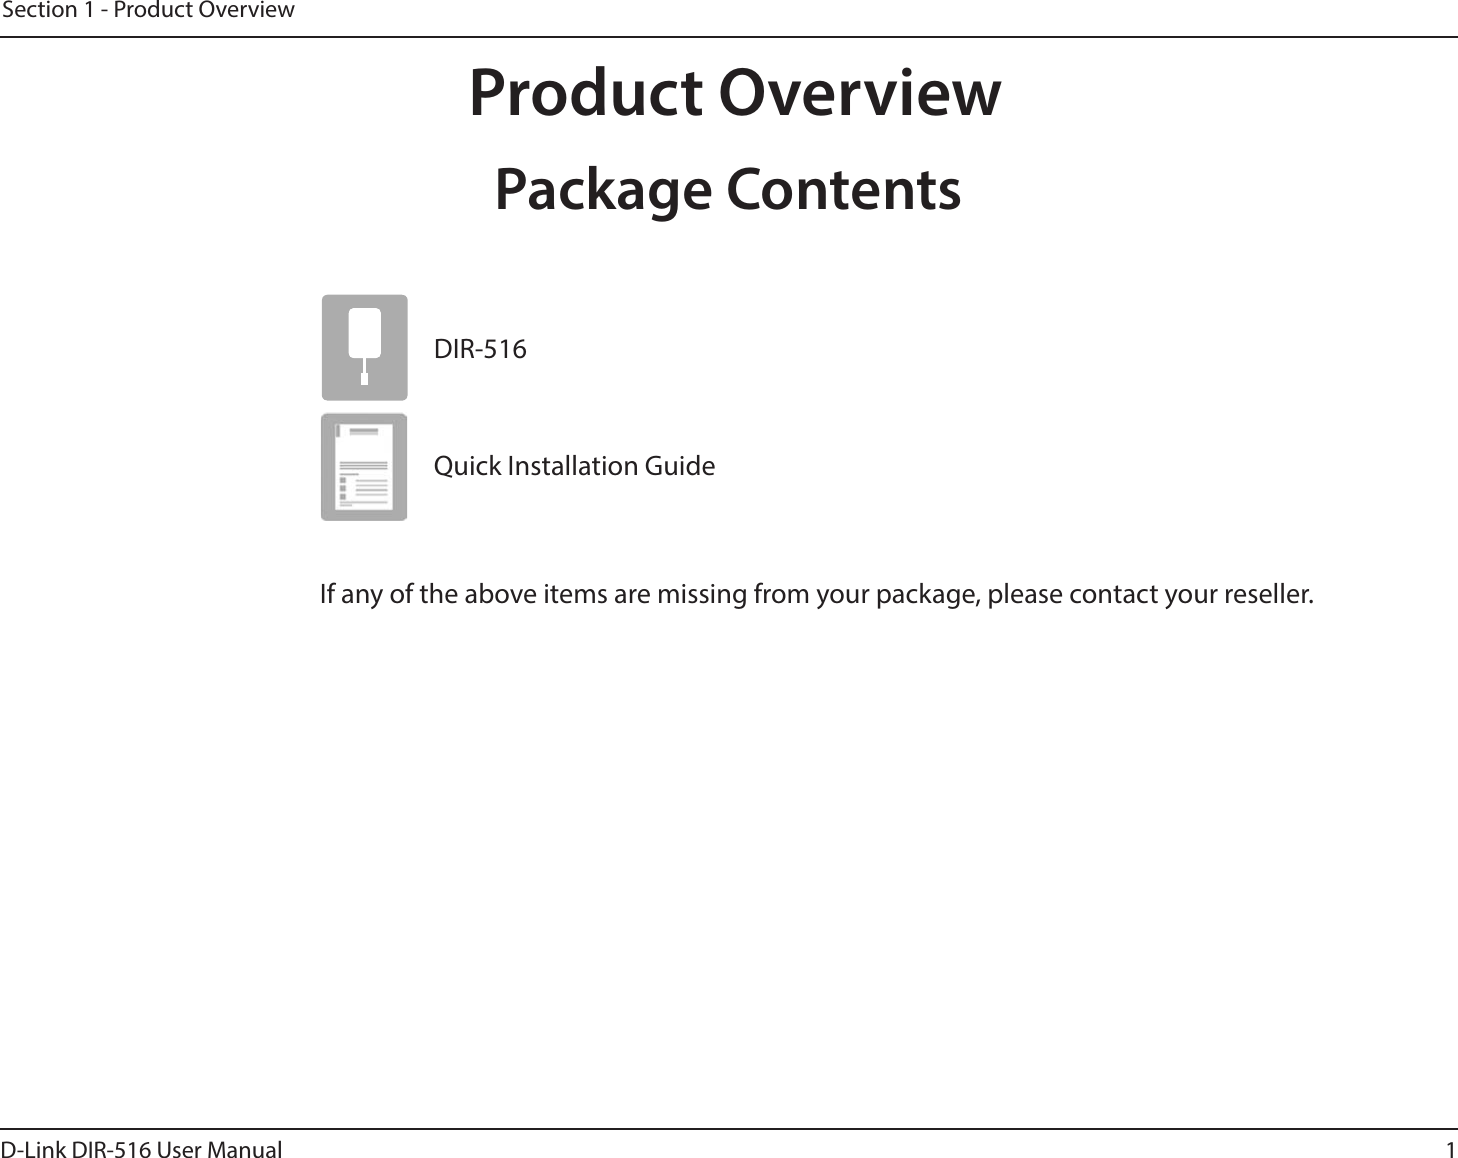 1D-Link DIR-516 User ManualSection 1 - Product OverviewPackage ContentsDIR-516  Quick Installation GuideIf any of the above items are missing from your package, please contact your reseller.Product Overview